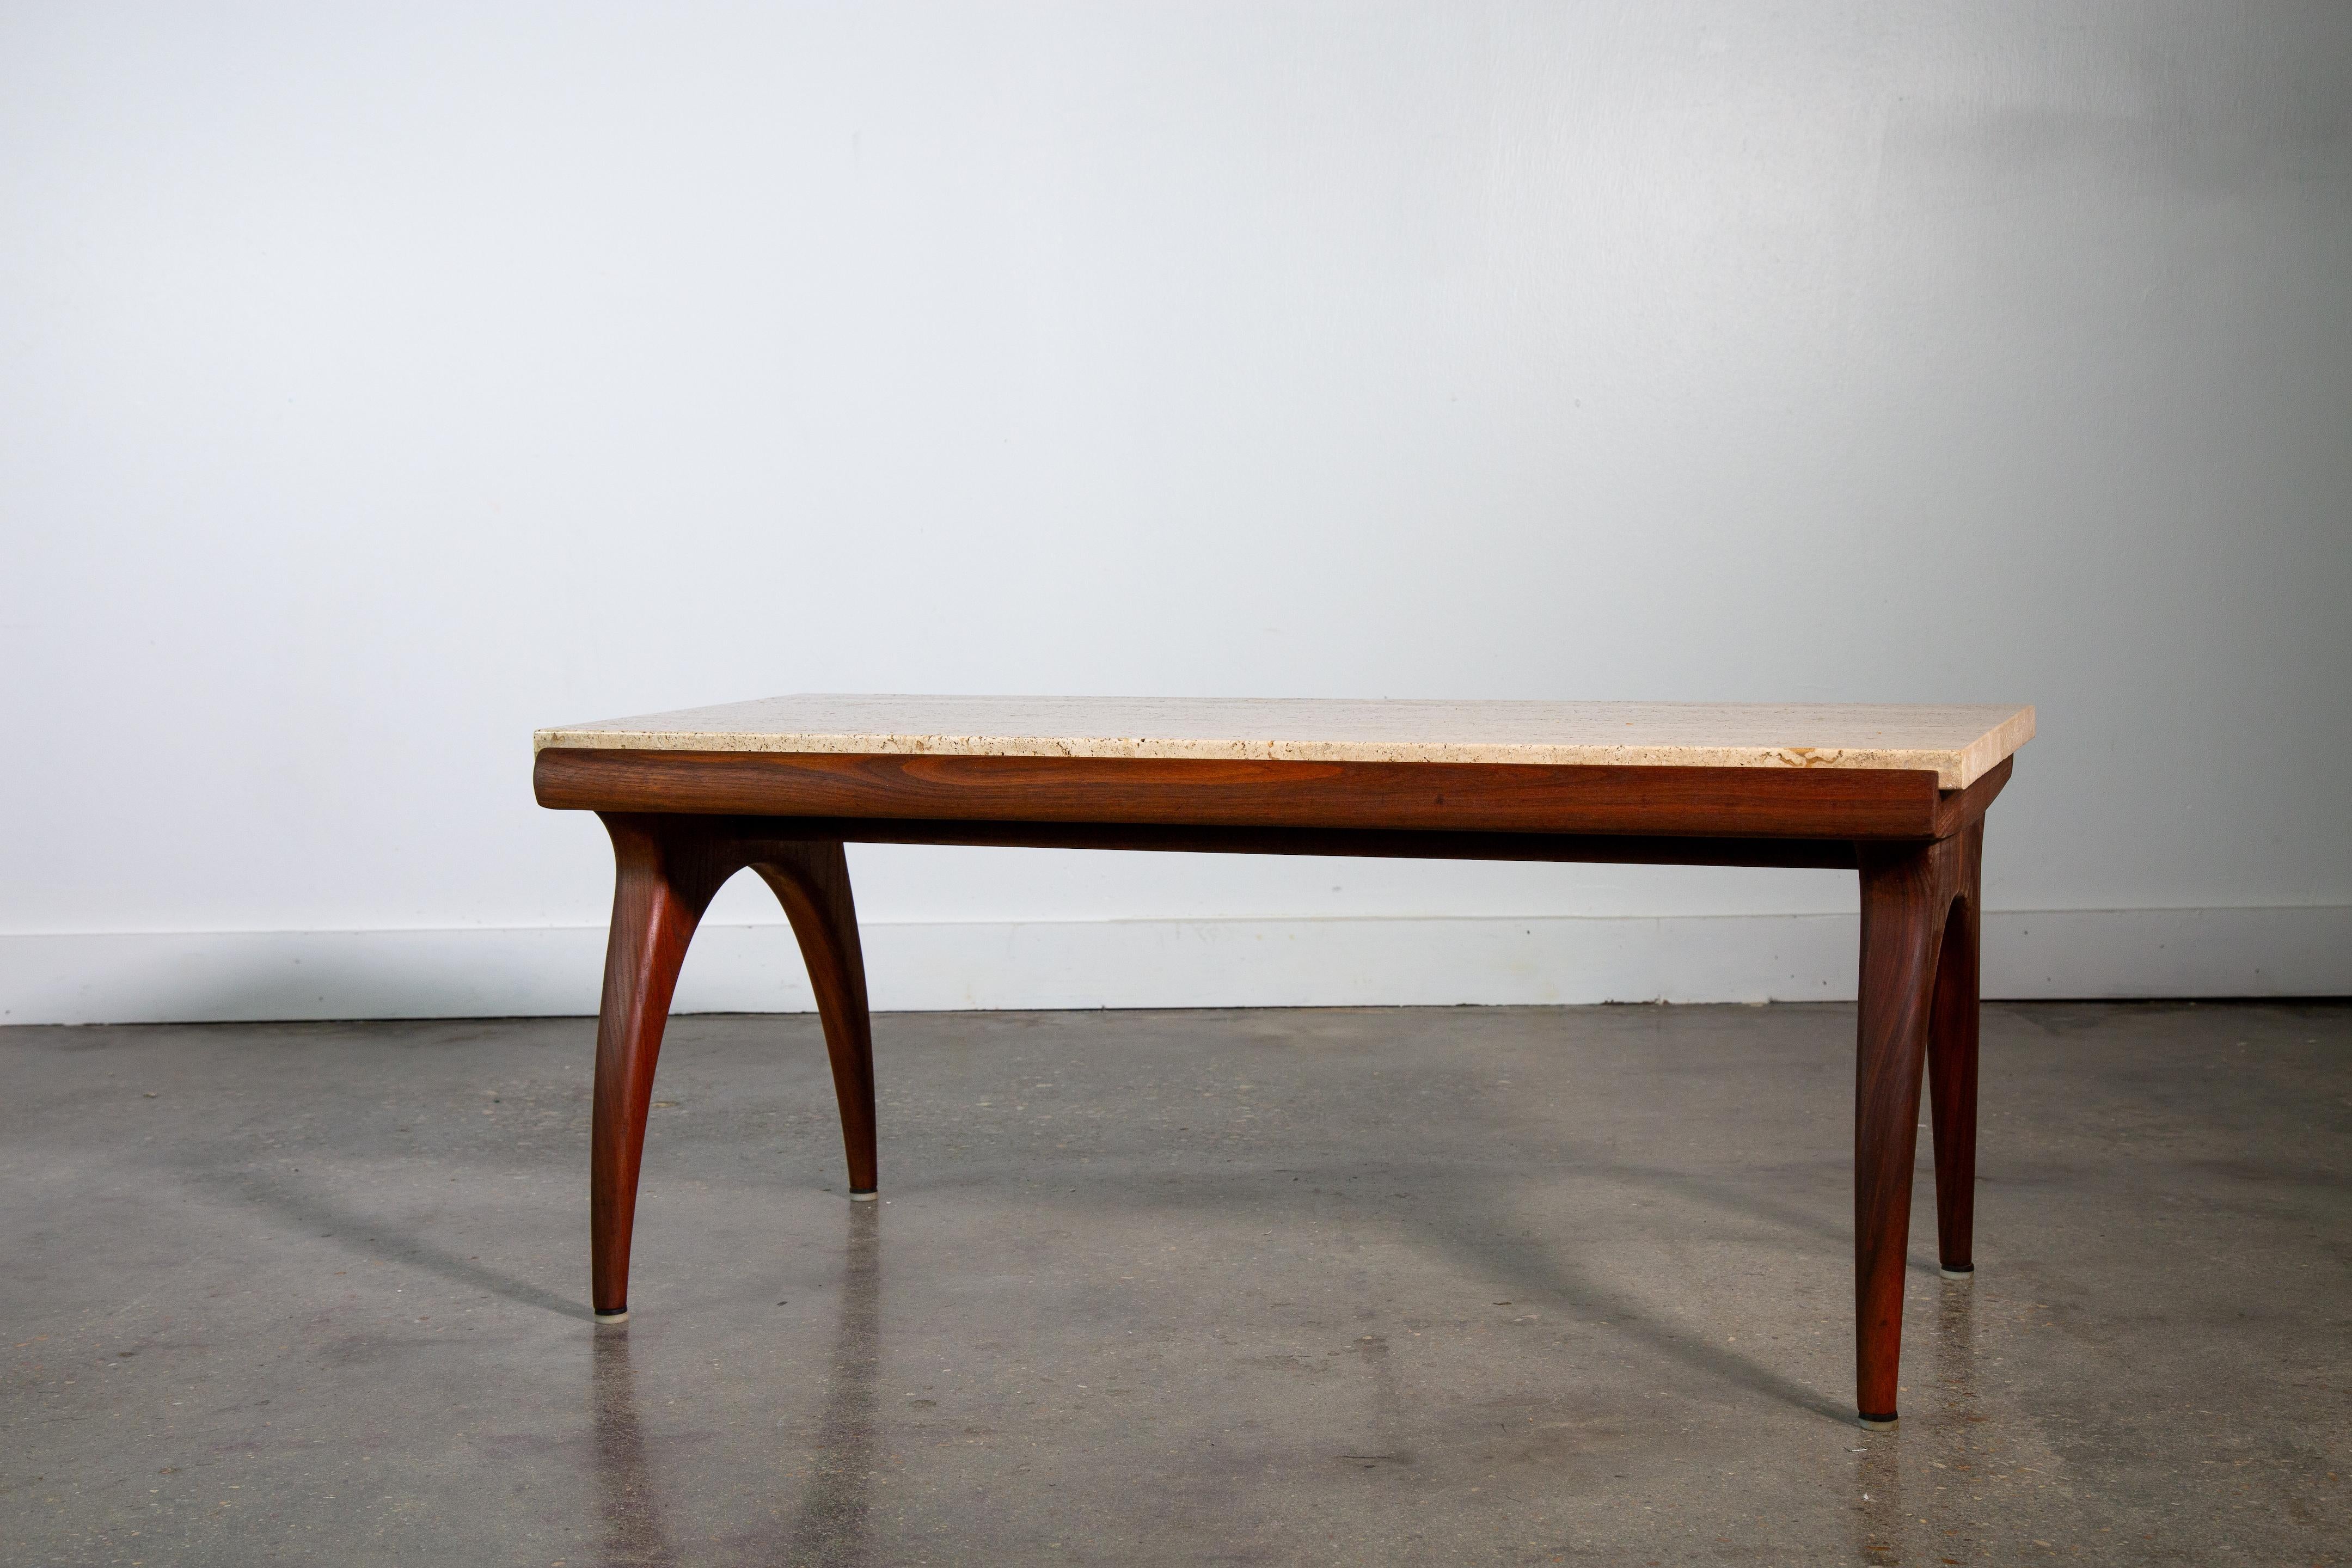 1950s Bertha Schaefer for M. Singer Sons Walnut and Travertine Coffee Table For Sale 1